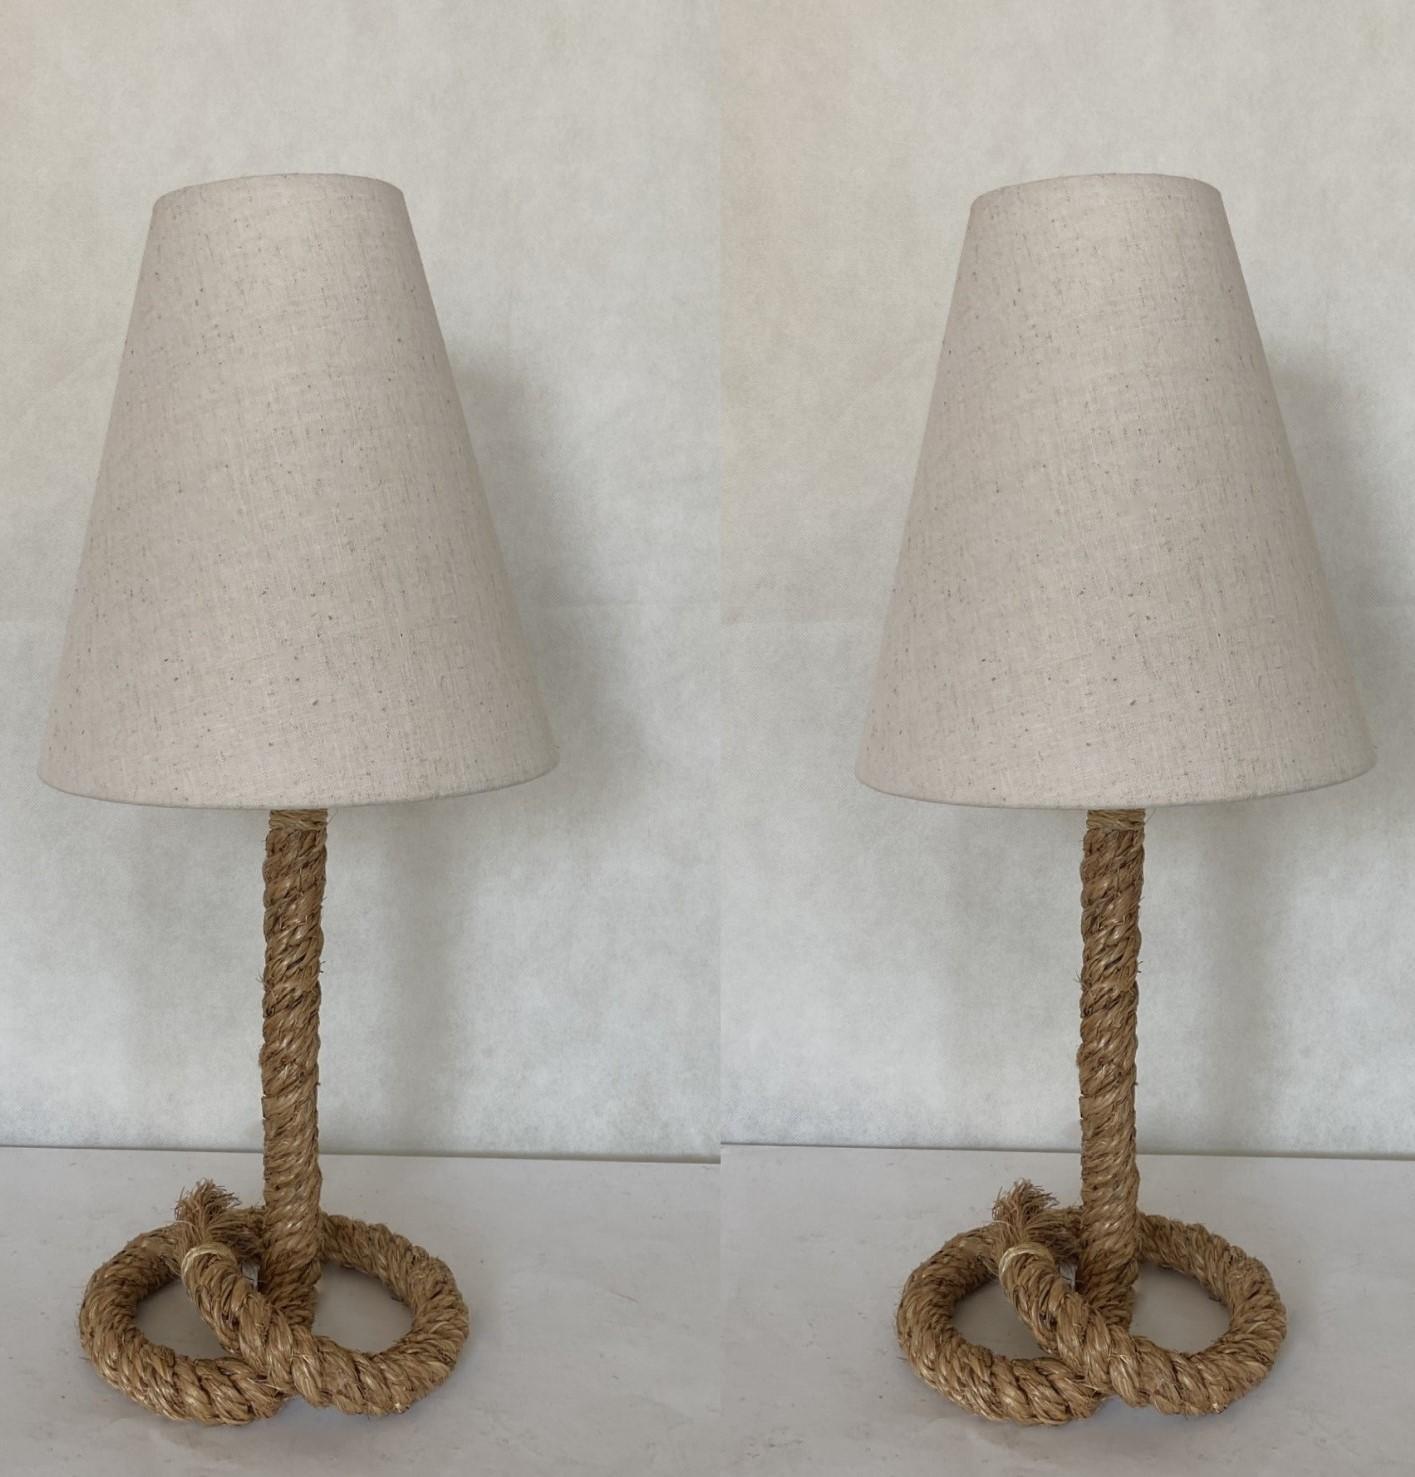 A pair of lovely hand-crafted rope table lamps with linen shades in the style of Audoux Minet, France, 1990s. Both lamps in very good condition, no damages, rewired, new shades. Each lamp tkes one E27 light bulb. Switch to turn on and off on the